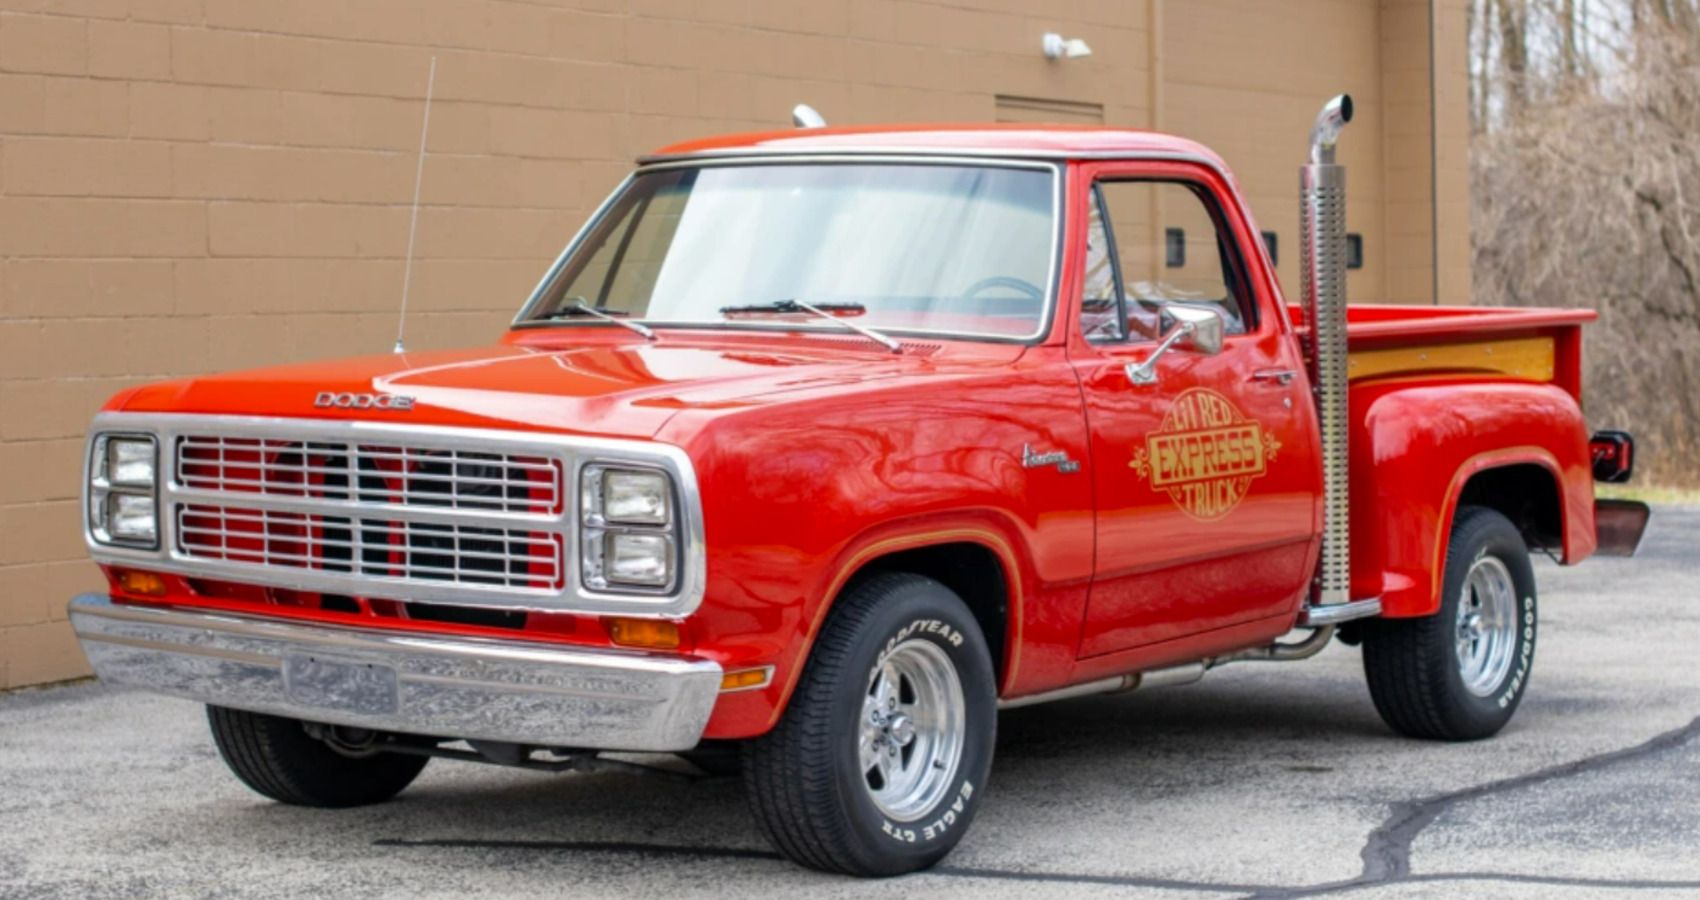 1979 Dodge Lil Red Express side view